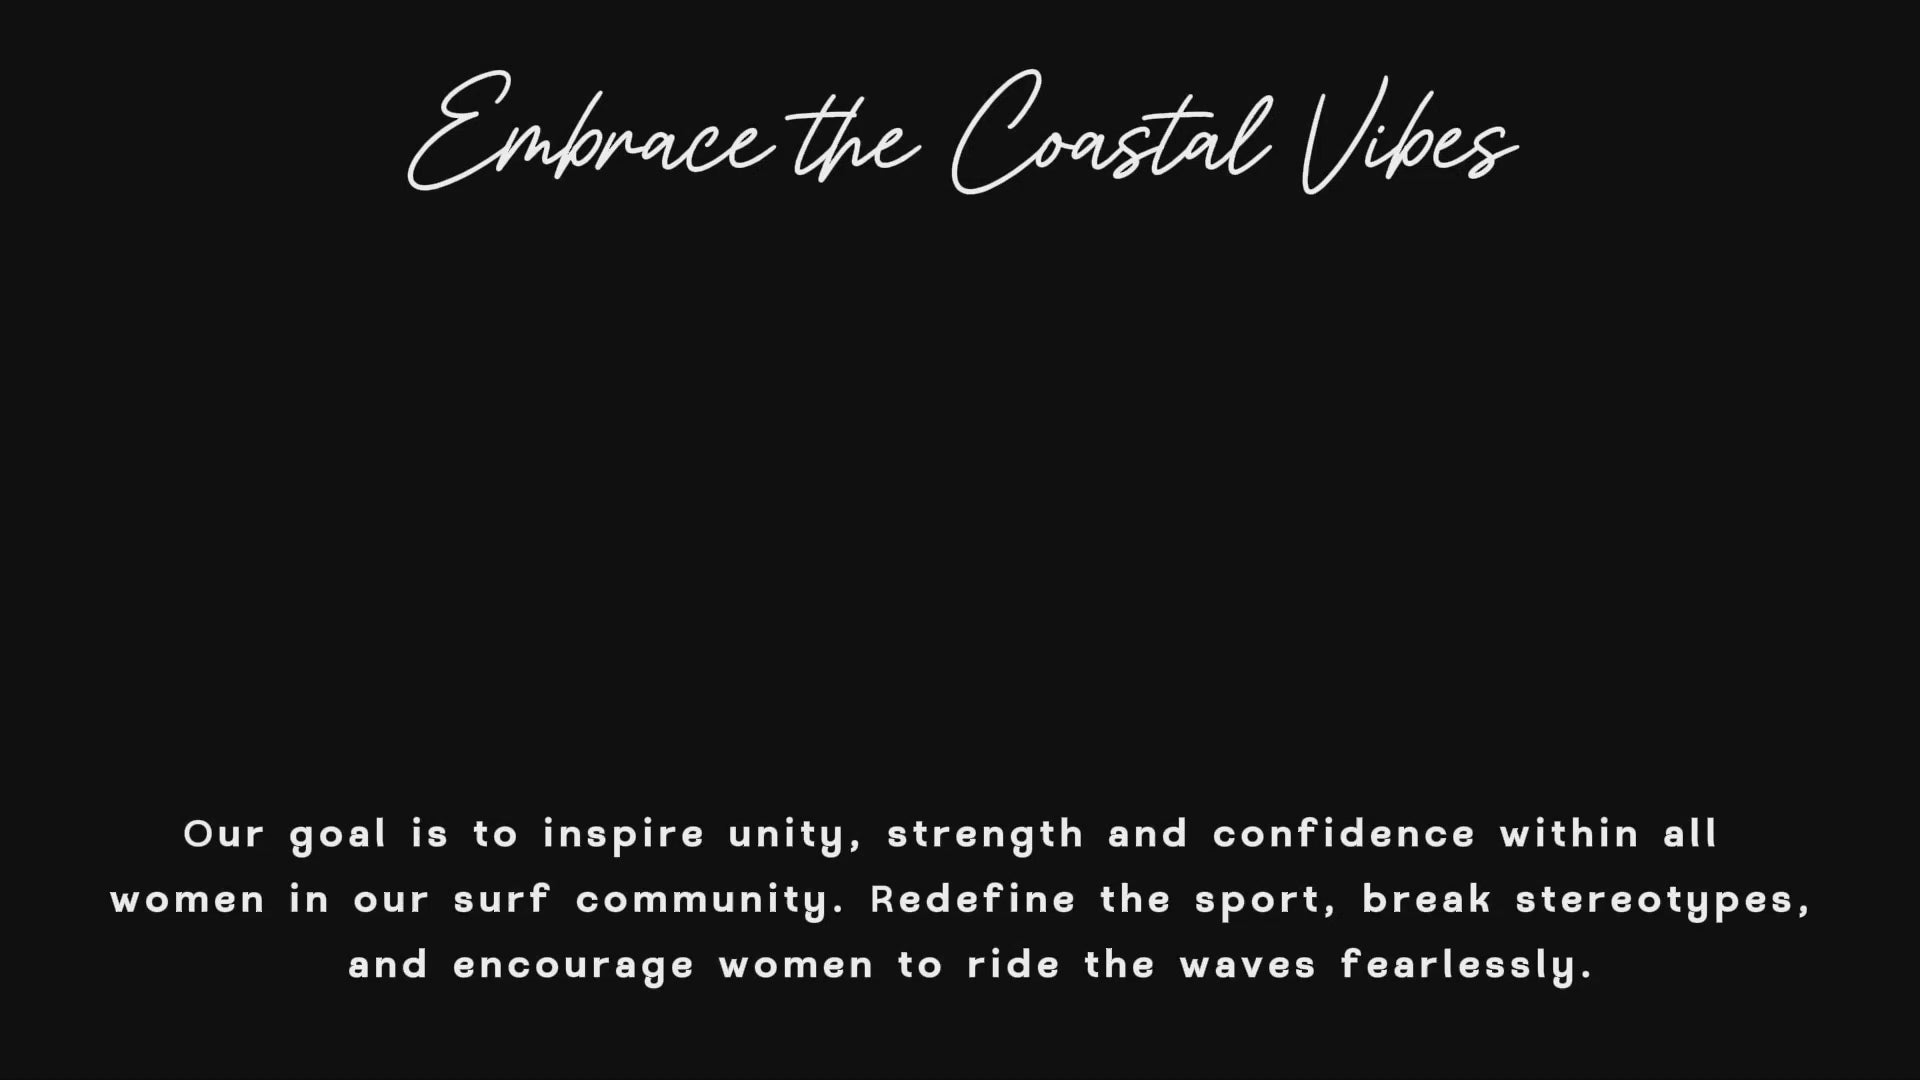 Load video: The video shows strong and confident females surfing and skating. It ends with the surfsistahz logo.